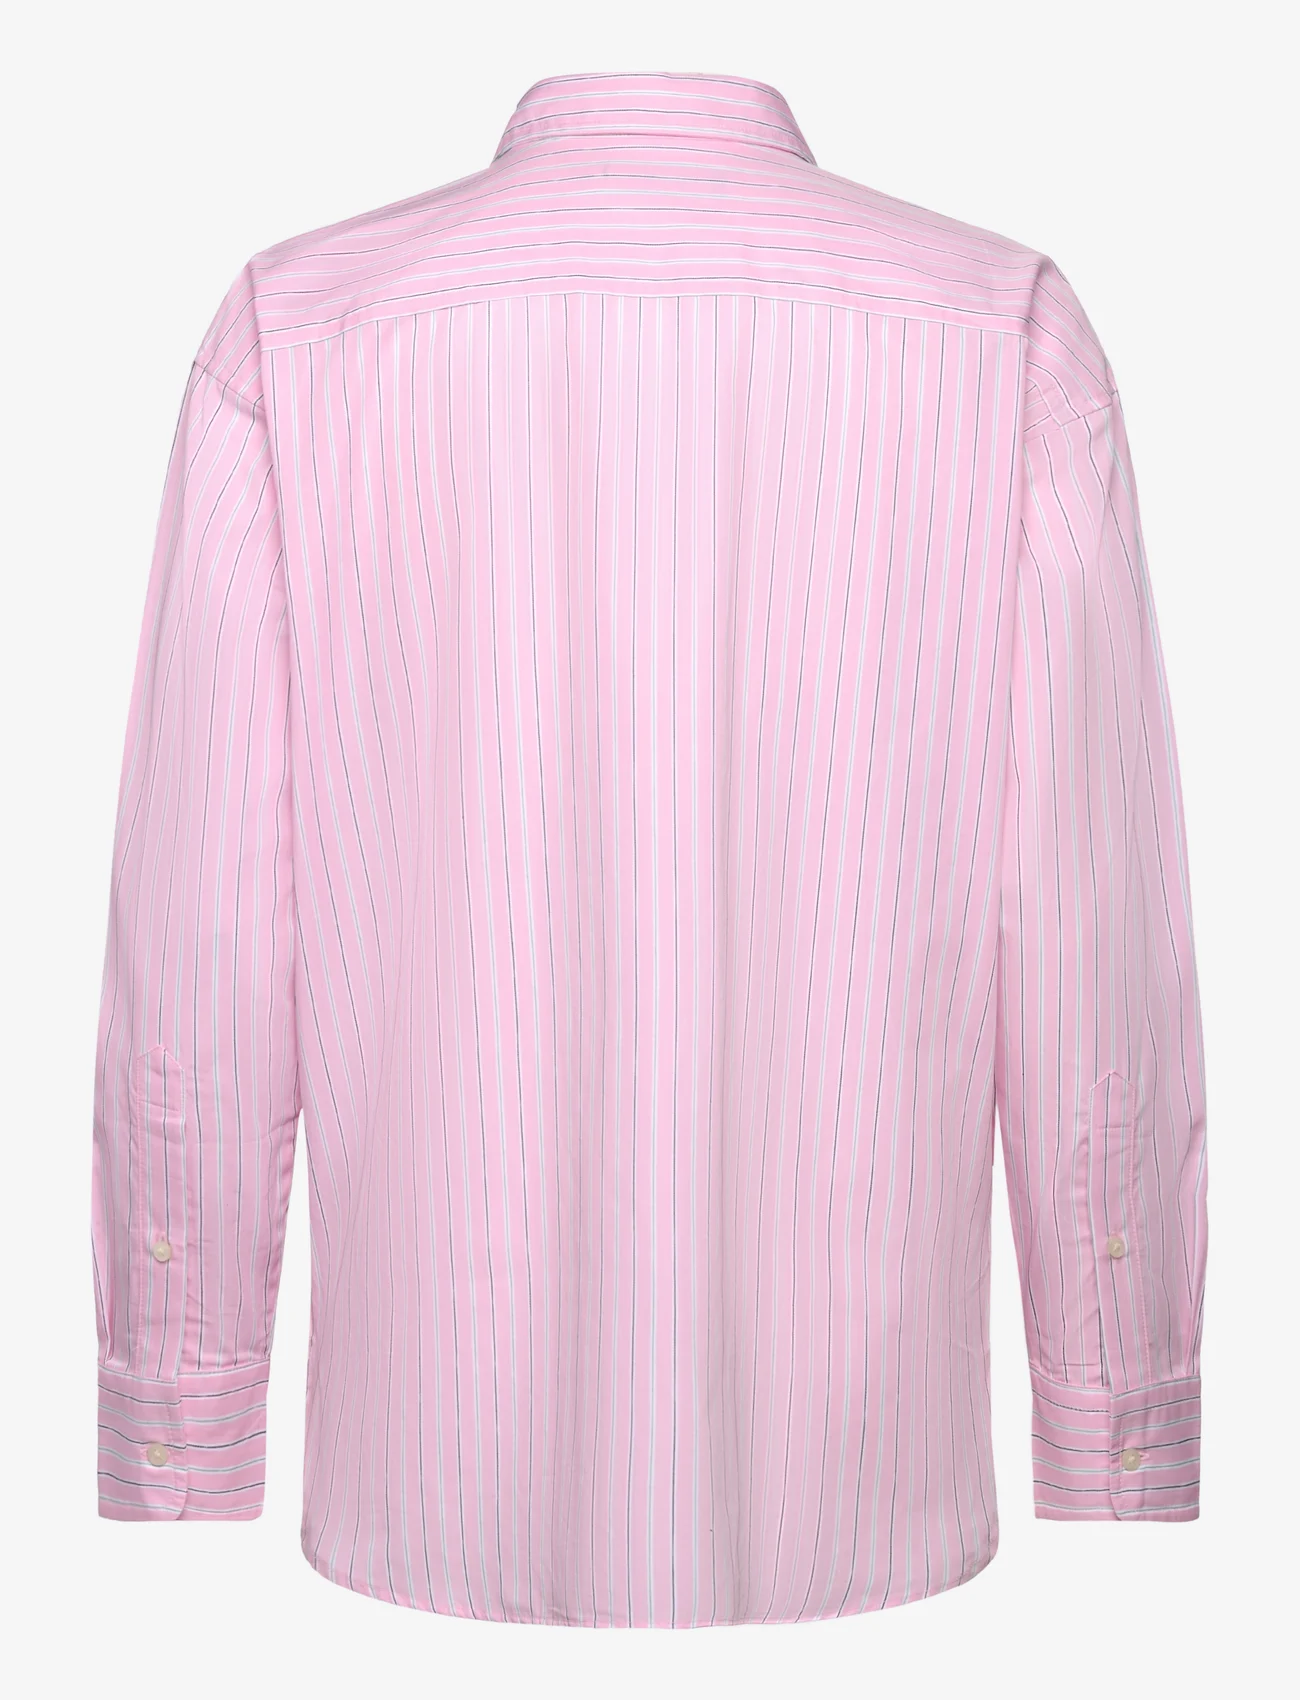 Lauren Ralph Lauren - Relaxed Fit Striped Broadcloth Shirt - long-sleeved shirts - pink/white multi - 1